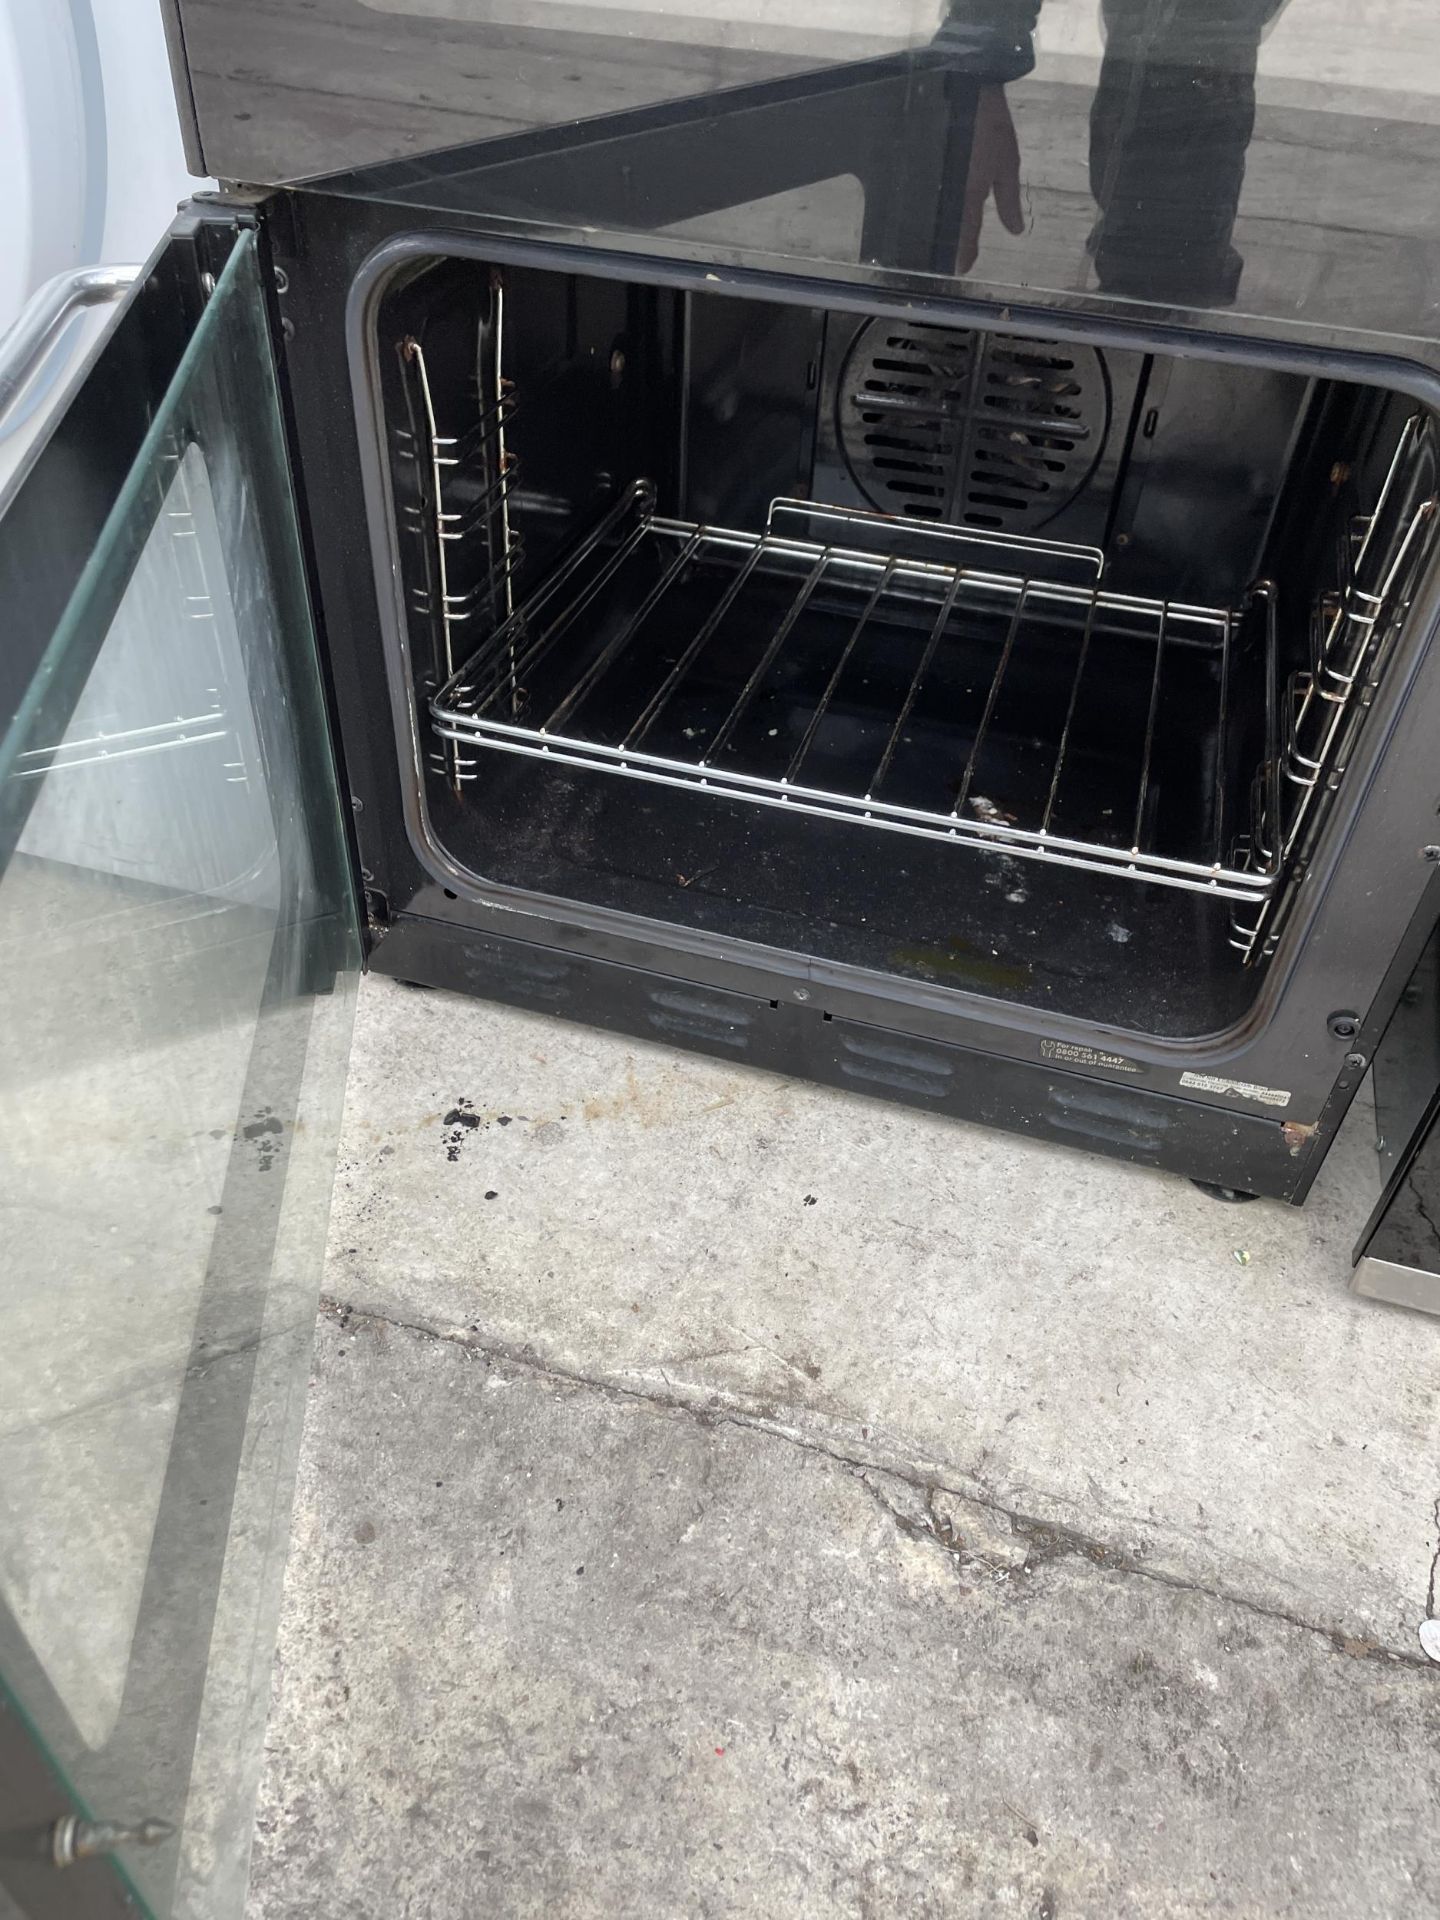 A BLACK NEW WORLD ELECTRIC OVEN AND HOB - Image 2 of 5